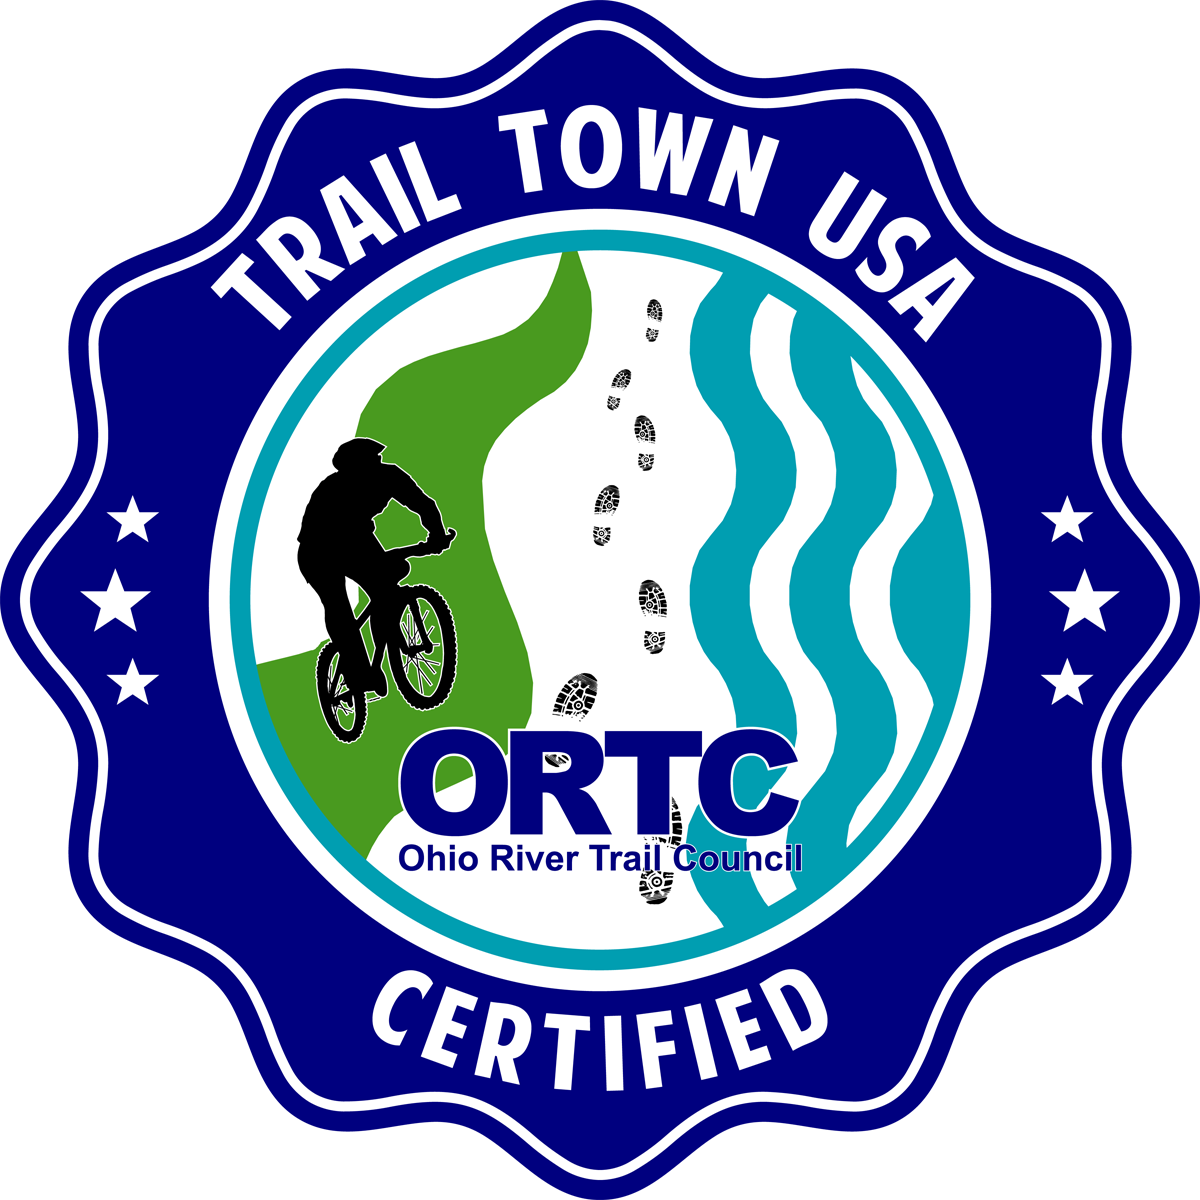 Trail Town USA Certification